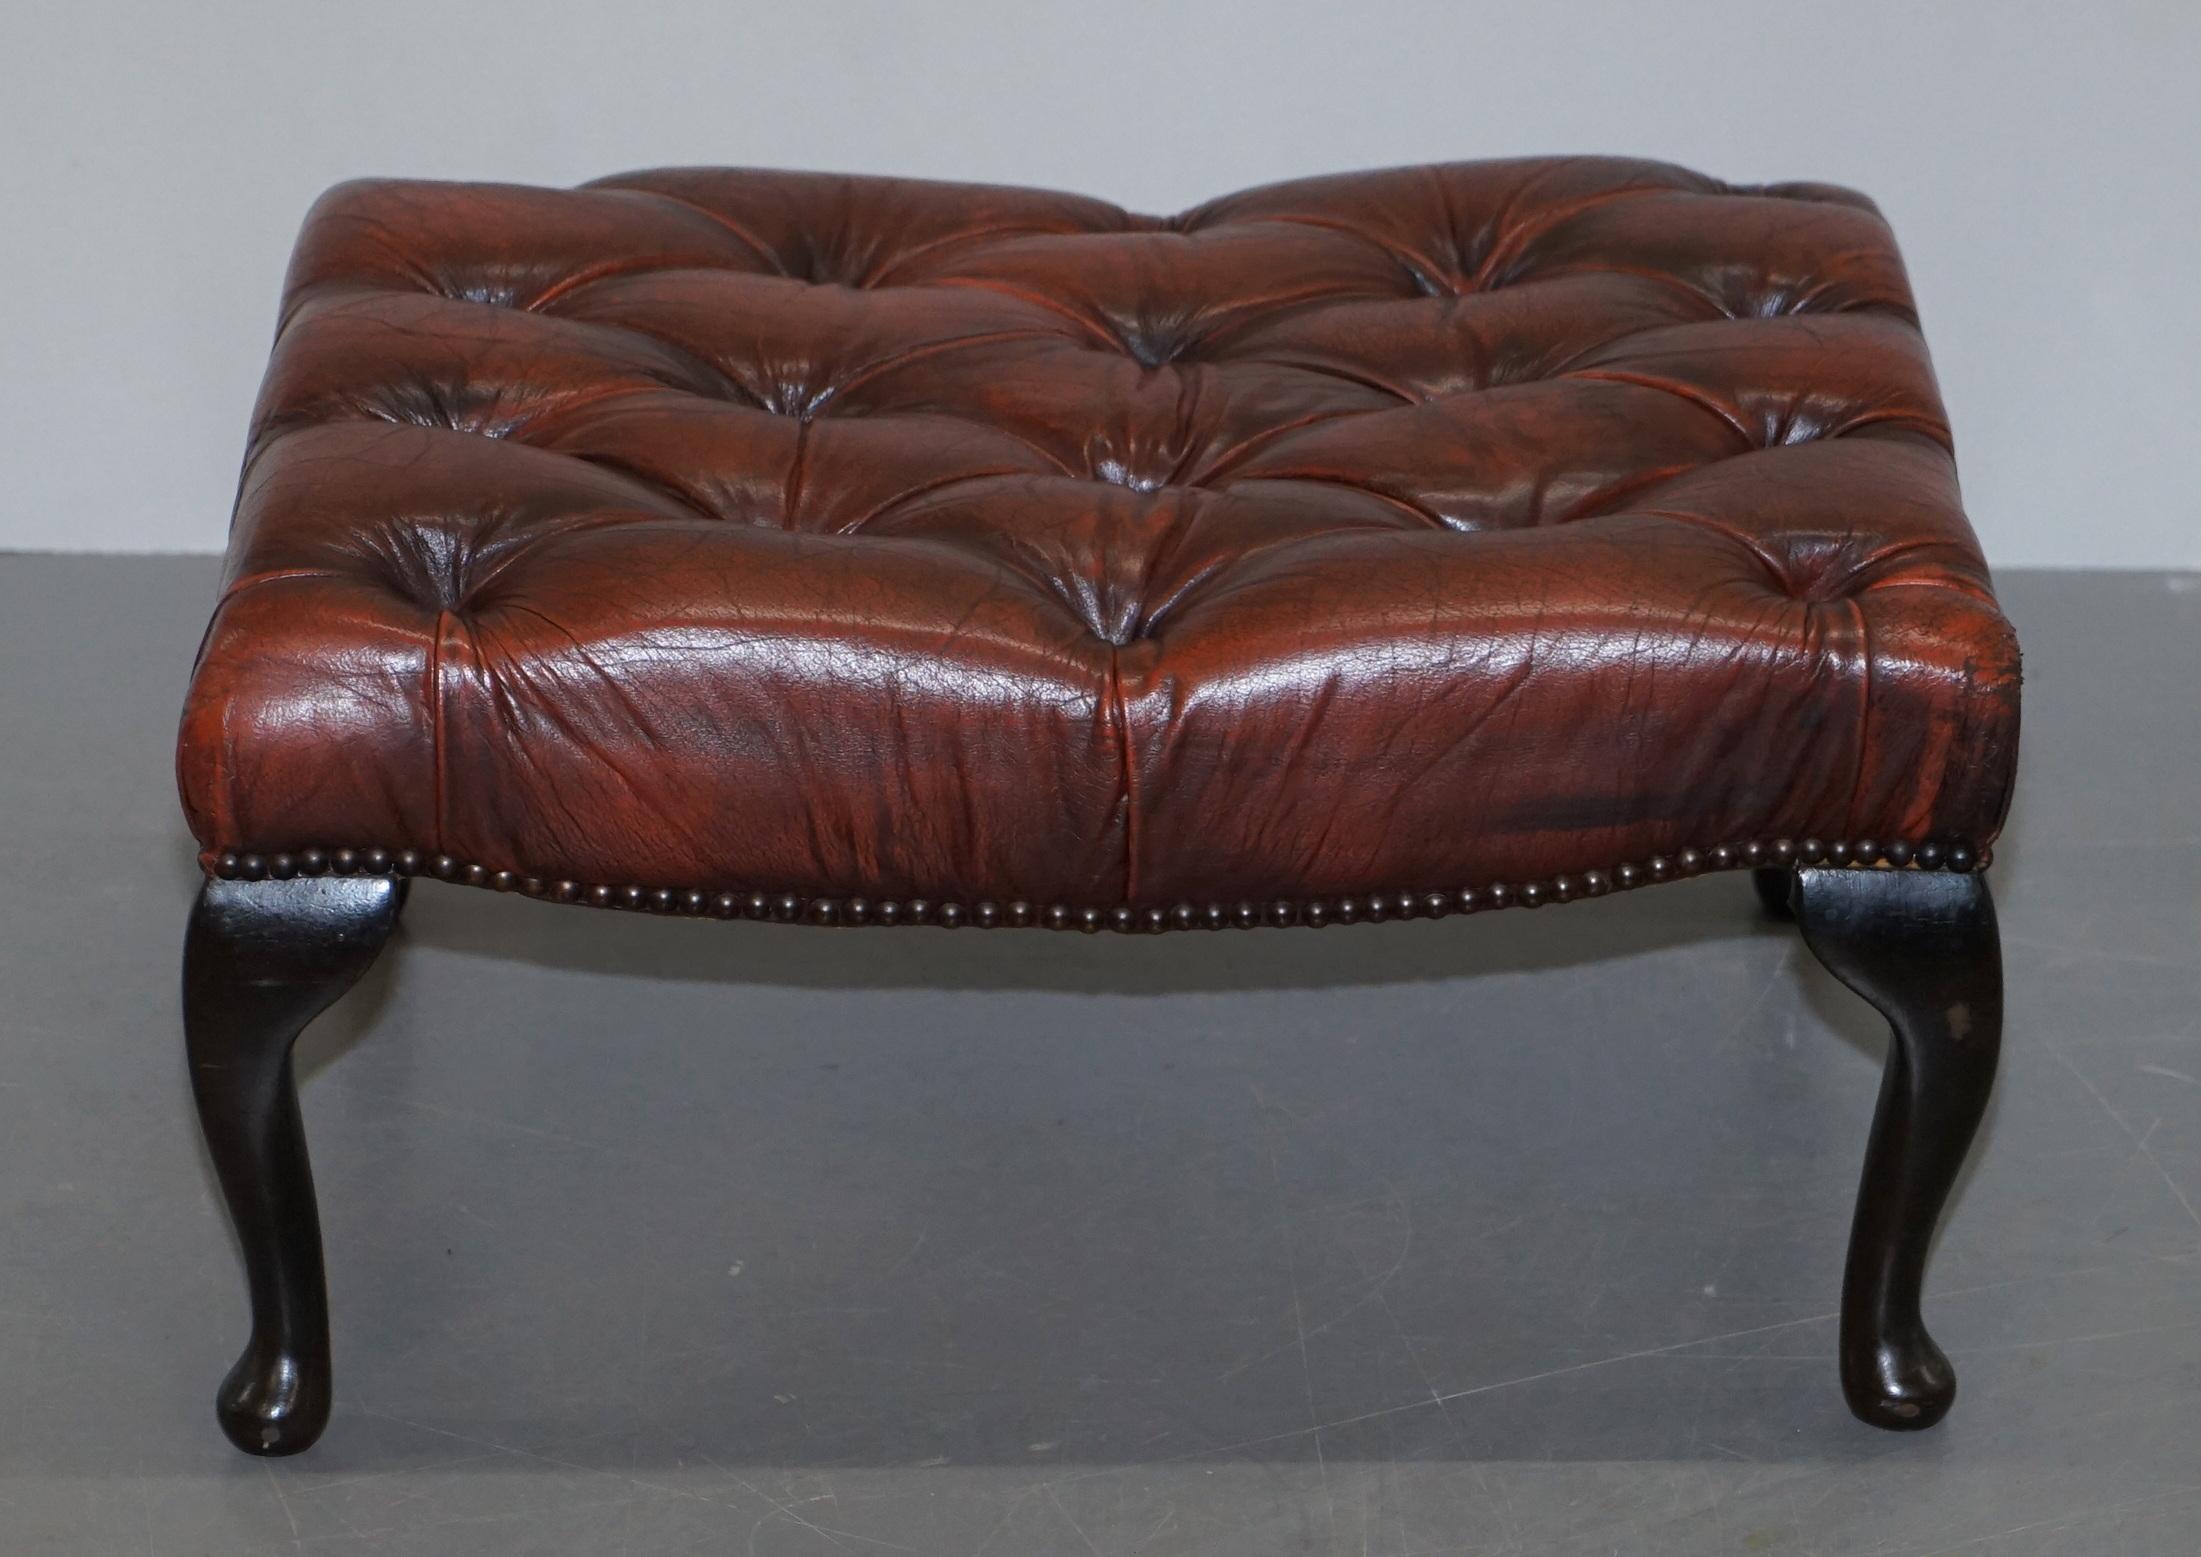 We are delighted to offer for sale this lovely vintage Chesterfield tufted brown leather footstool

A good looking well made and decorative piece, the stool is tufted and buttoned all over, the legs are air dried beechwood

We have cleaned waxed